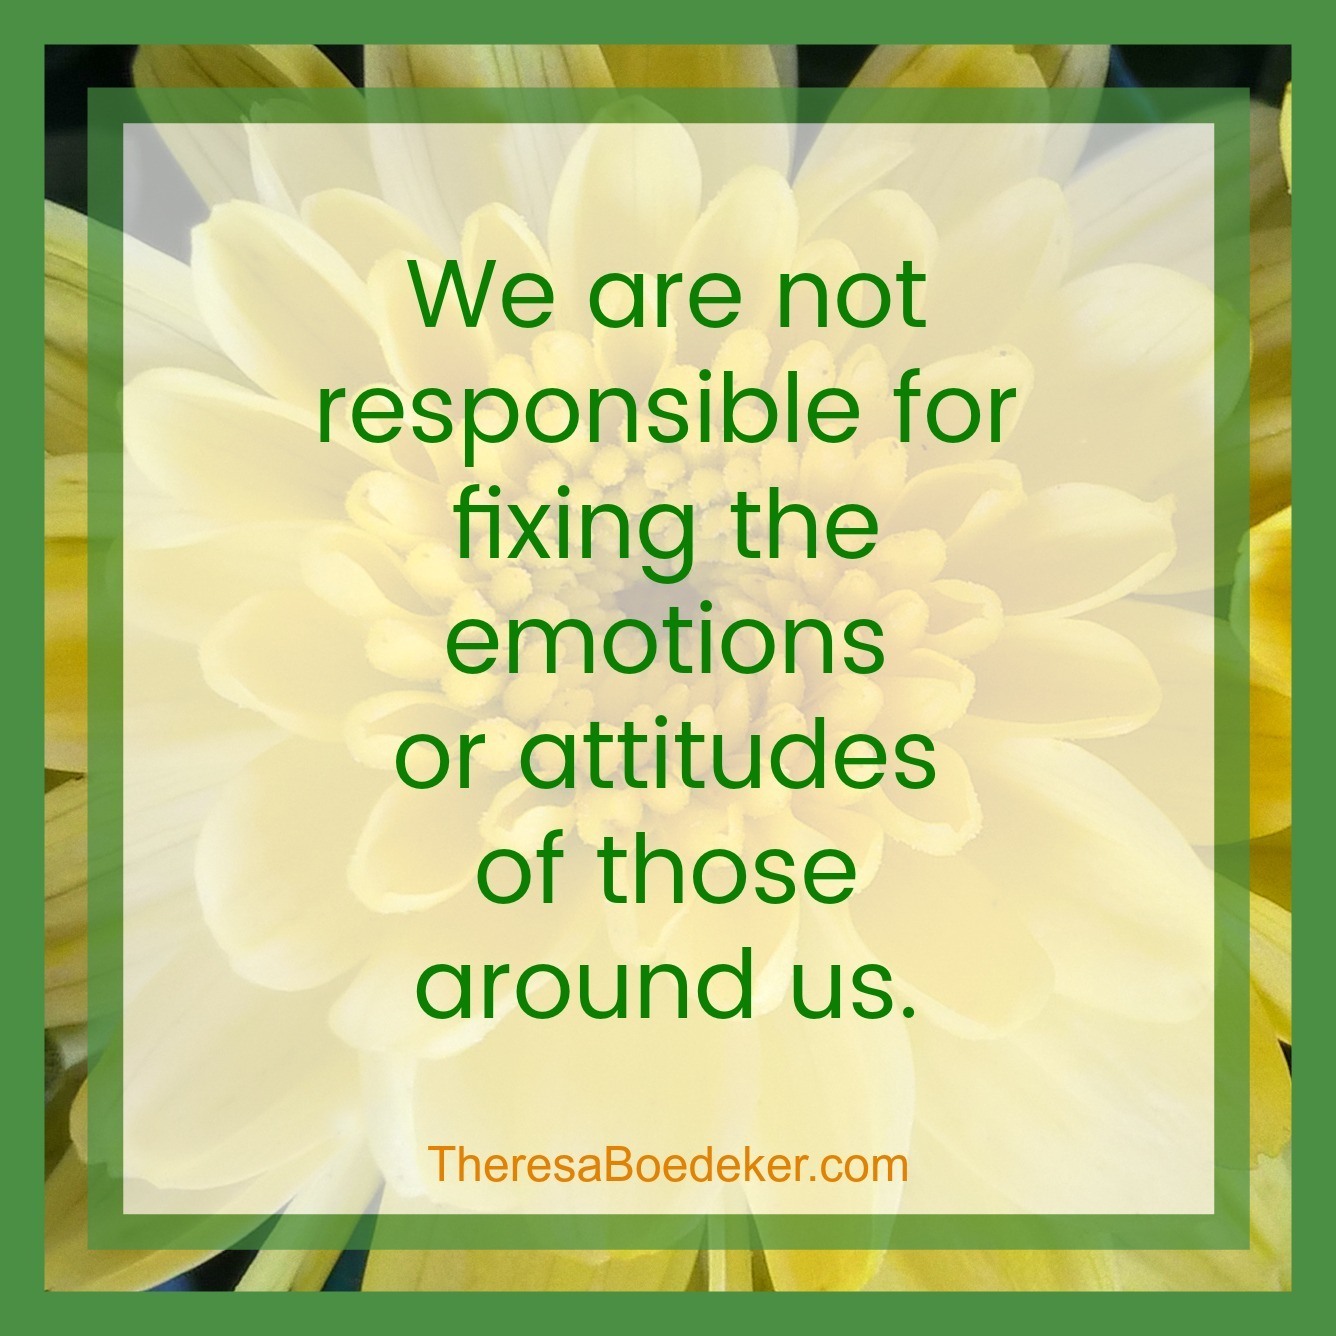 The emotions of others can make us uncomfortable, so we try to fix them and make them happy. But dealing with the emotions of others is not our responsibility. Learn what to do instead.